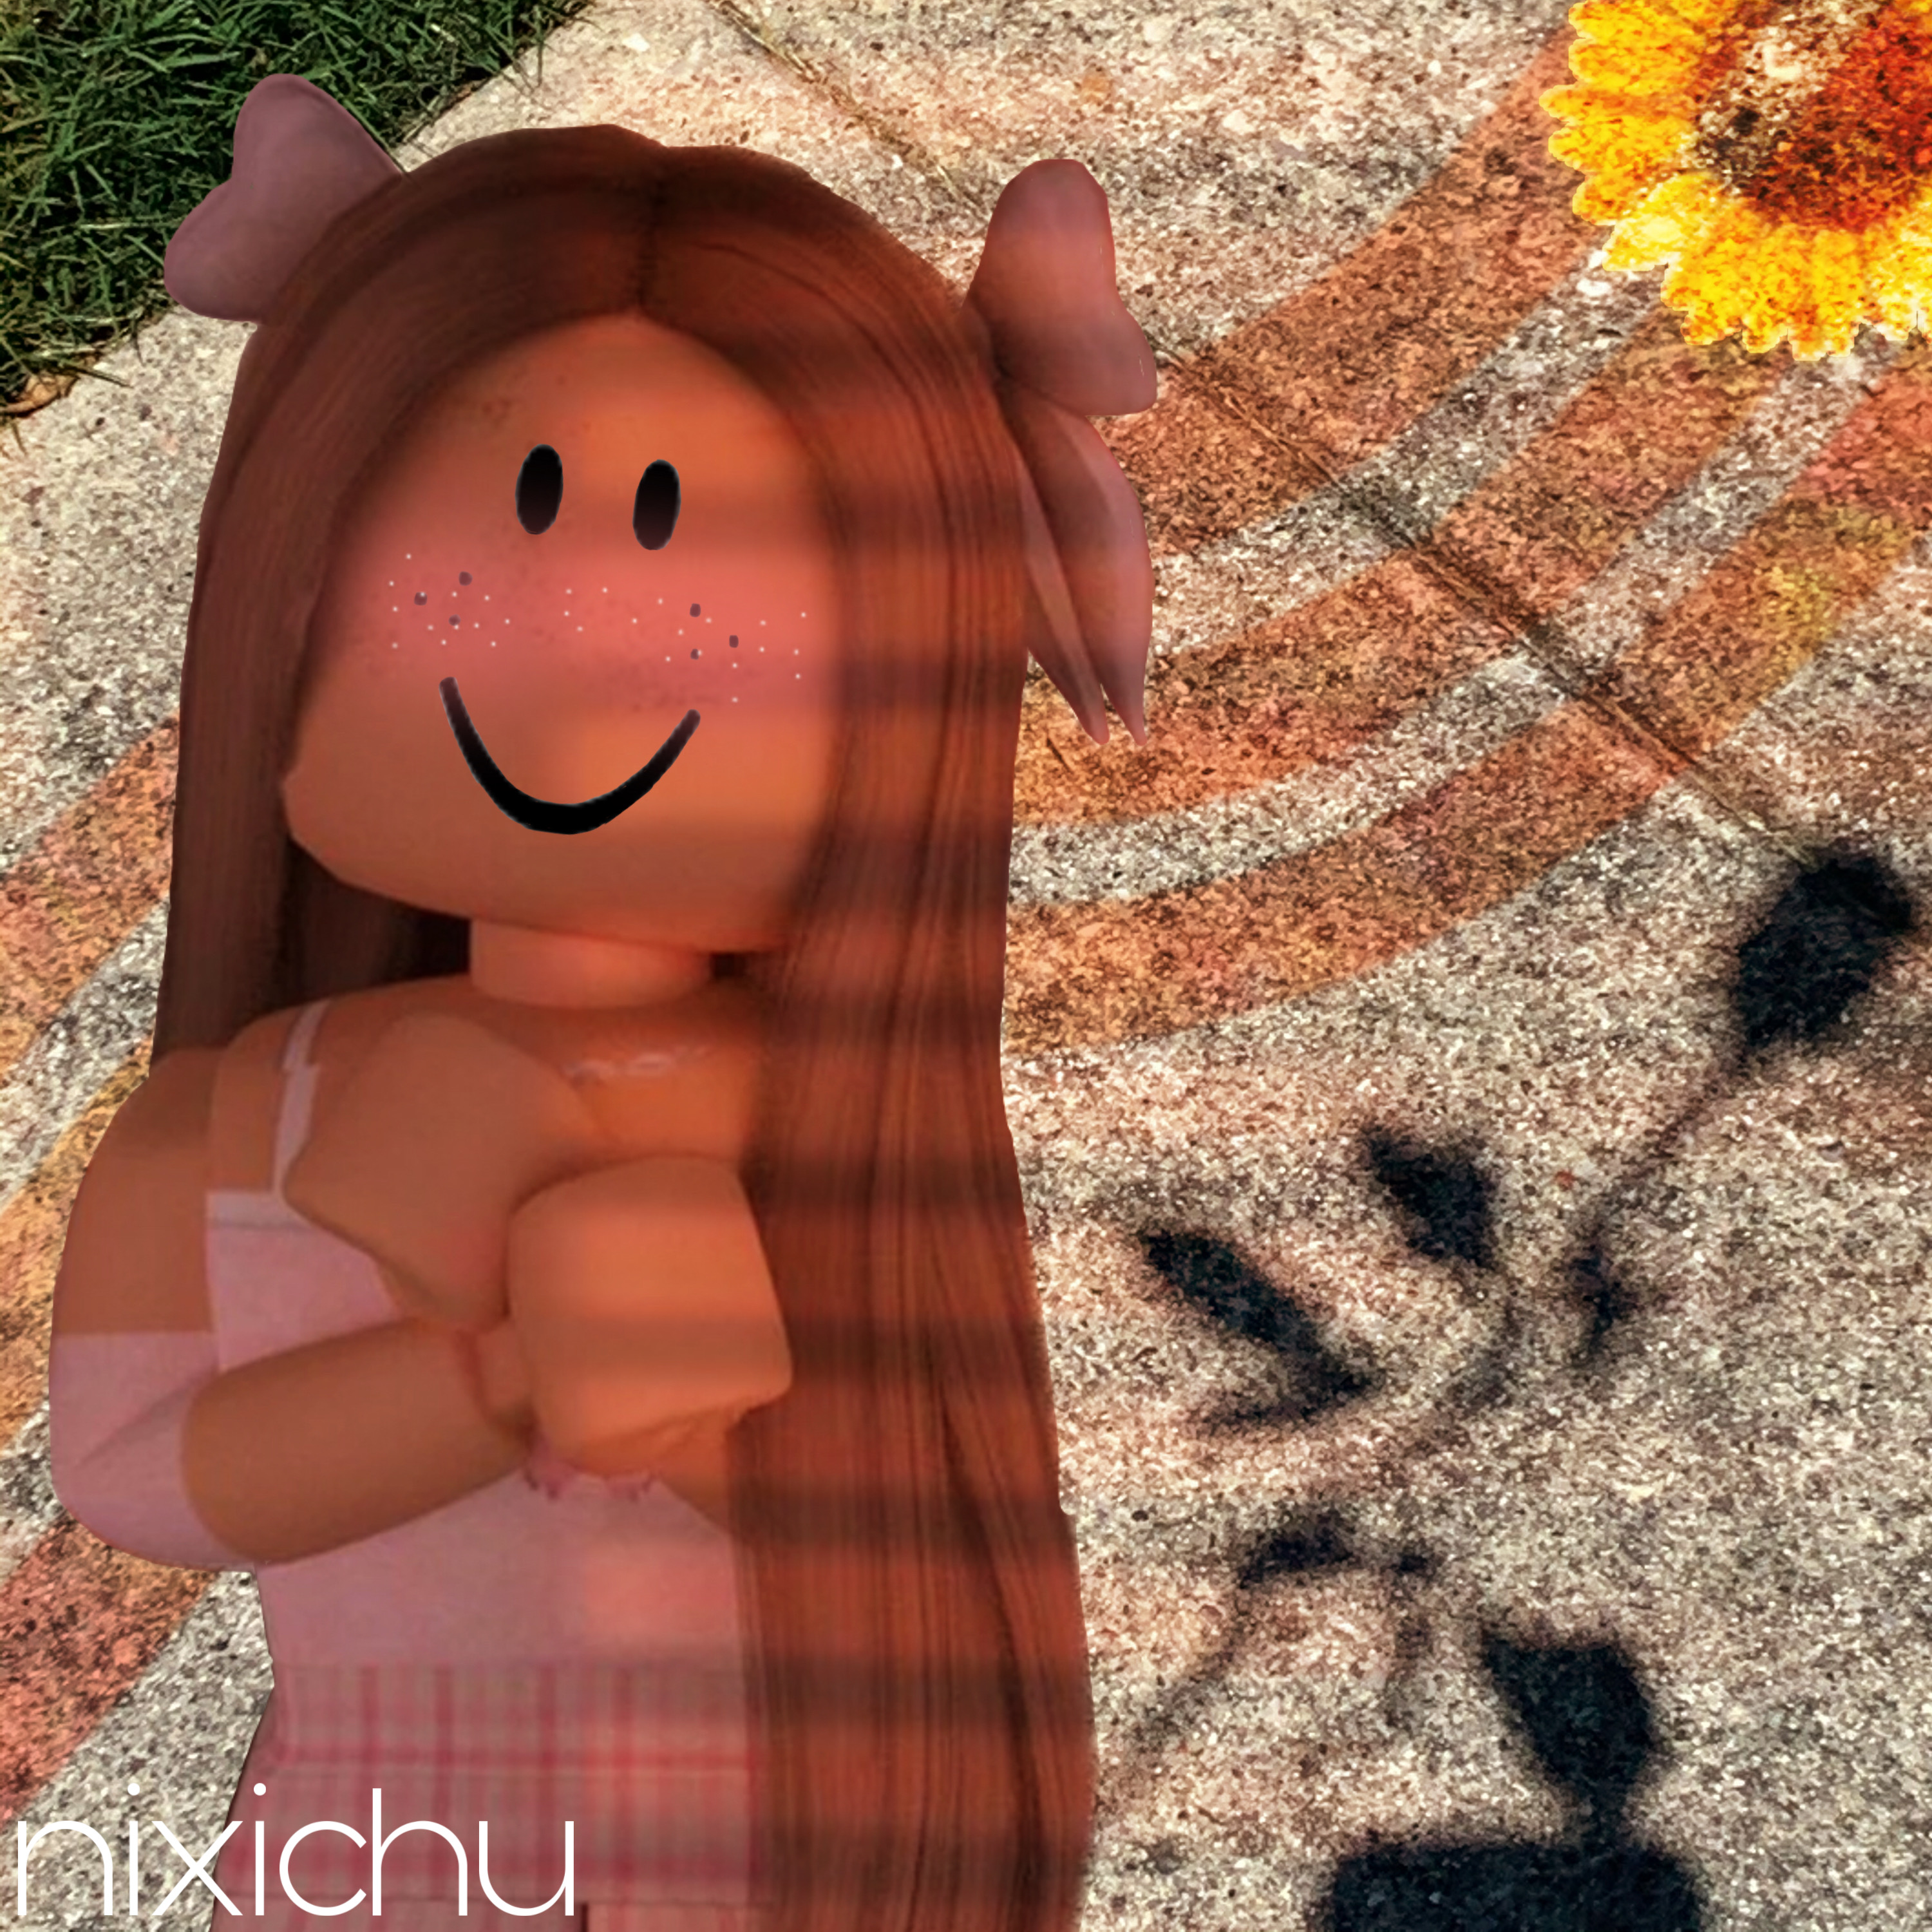 Robloxgfx Girl Robloxgirl Rblx Cute Image By Nixichu - cute roblox girl robloxgirl freetoedit